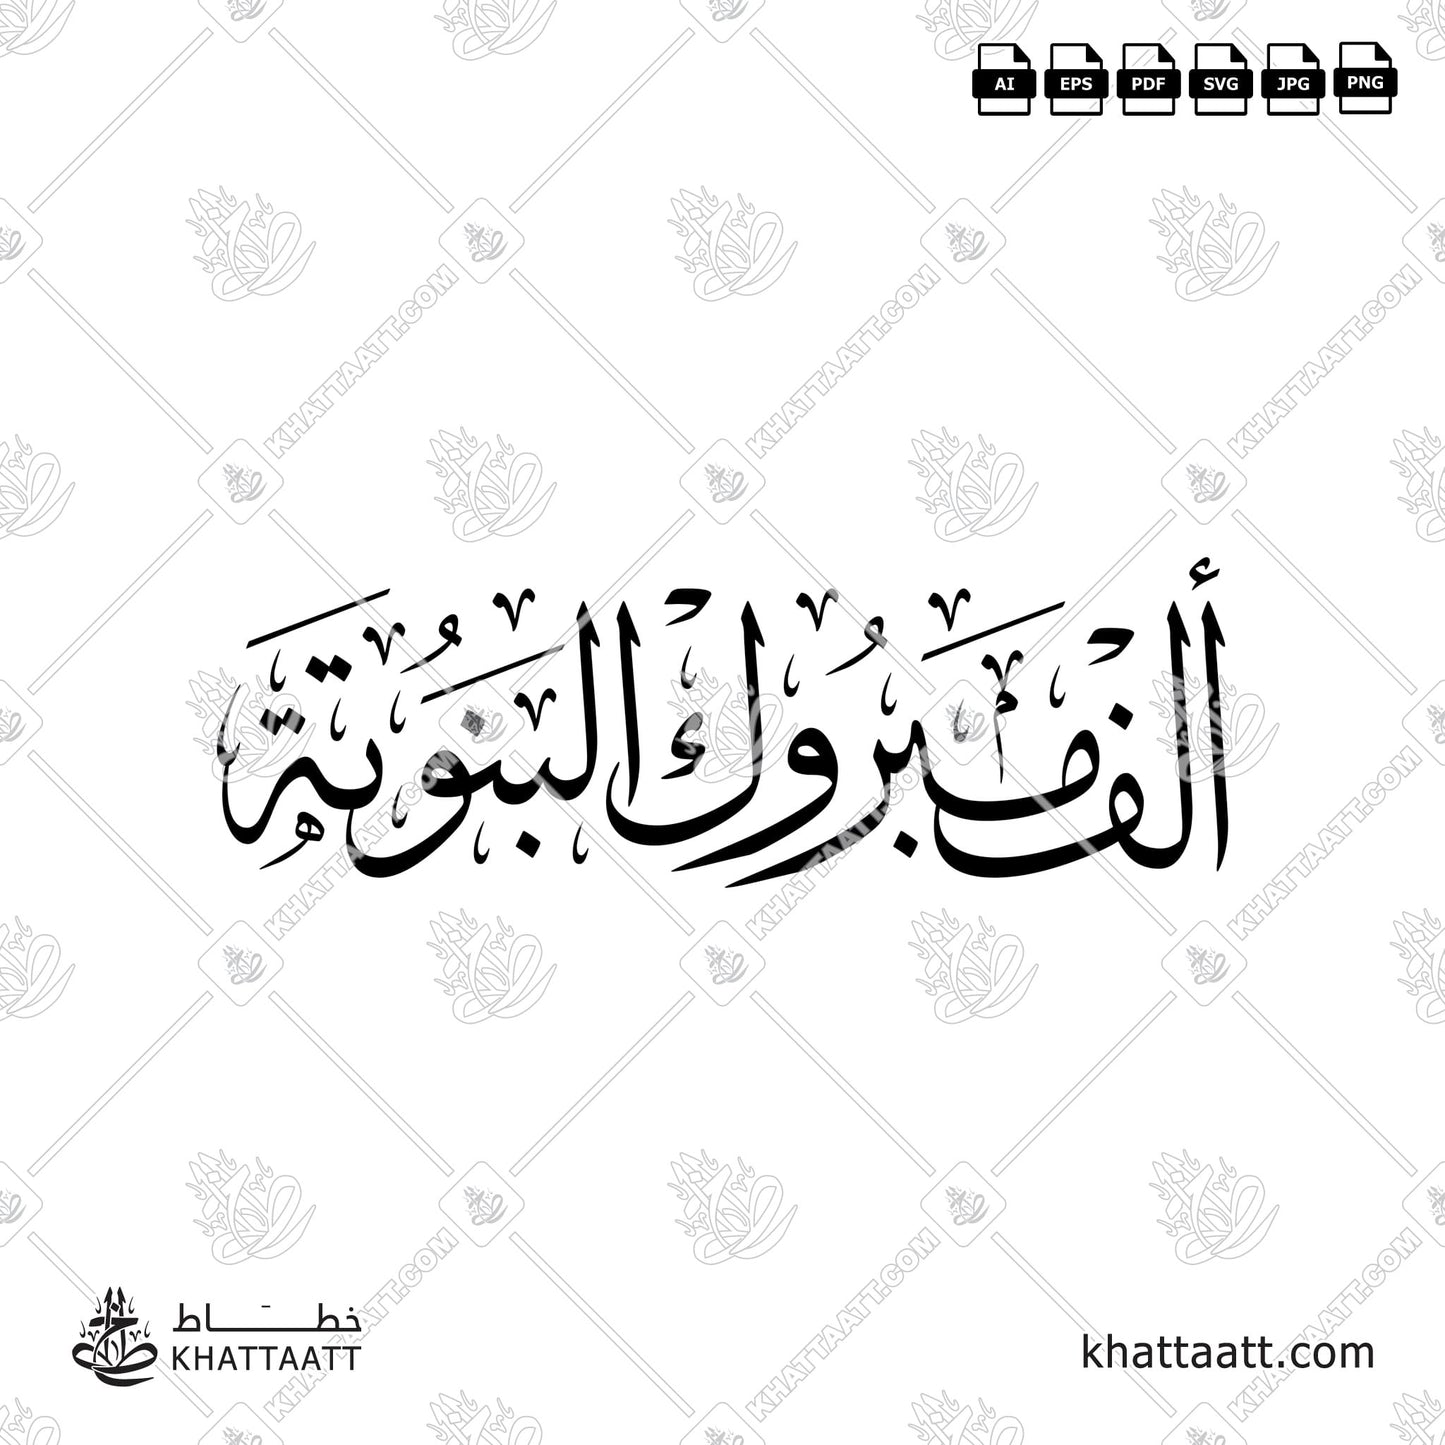 Arabic Calligraphy of ألف مبروك البنوتة, a greeting for a newborn baby girl, translated as: "Congratulations for your Newborn Baby Girl", in Thuluth Script خط الثلث.